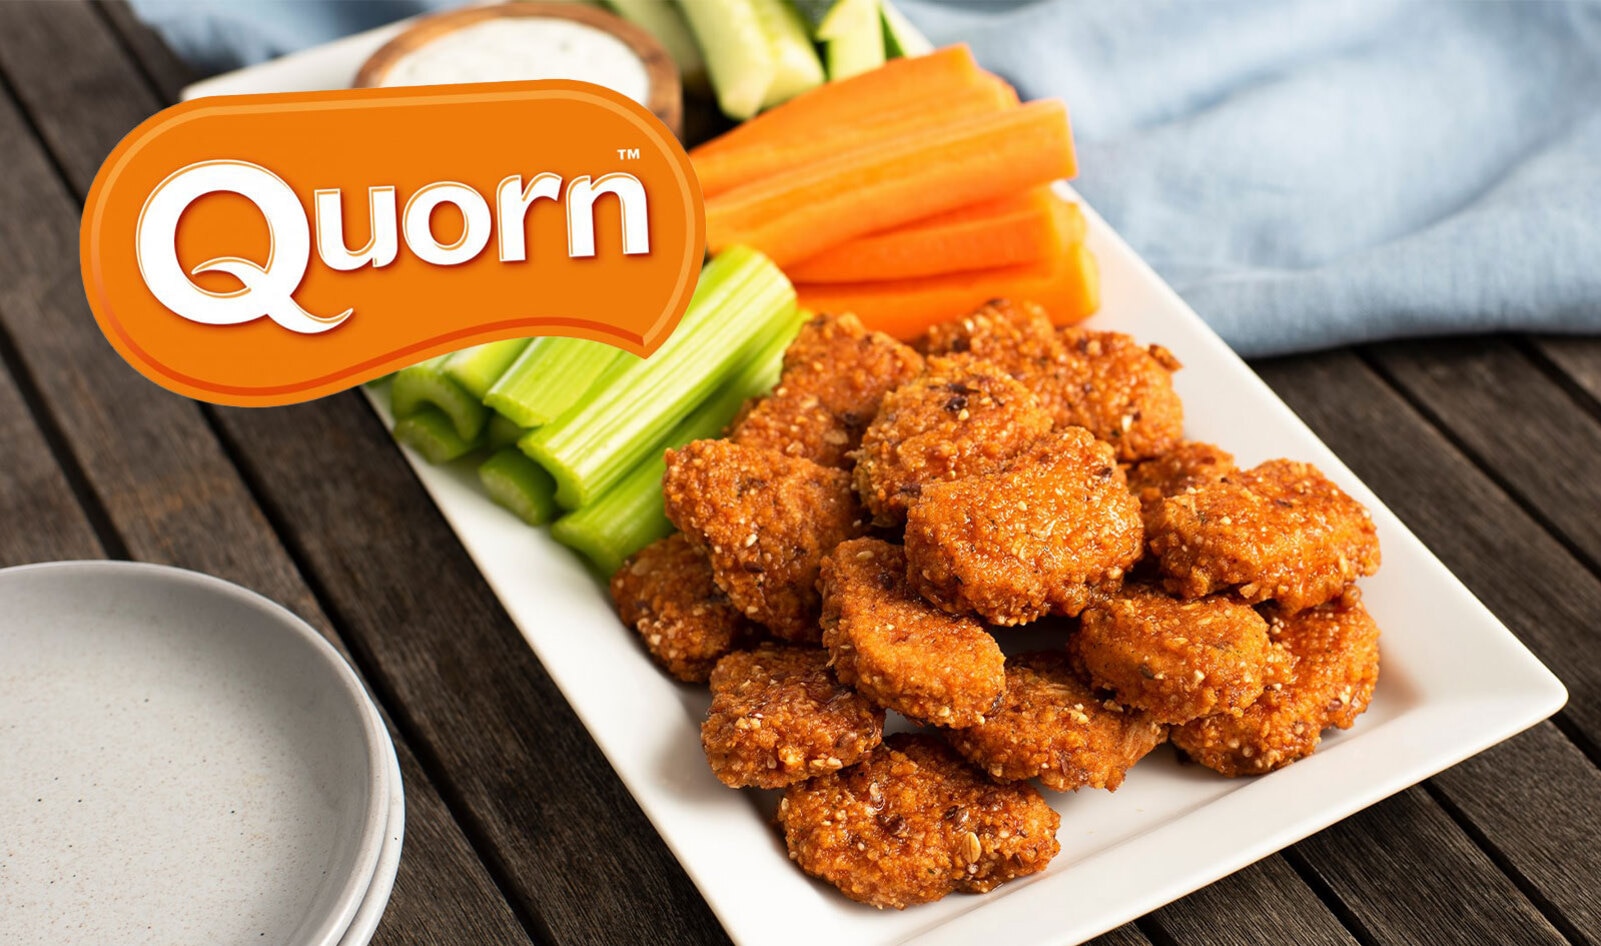 Quorn Aims to Be the King of Vegan Chicken With New R&amp;D Center in Texas